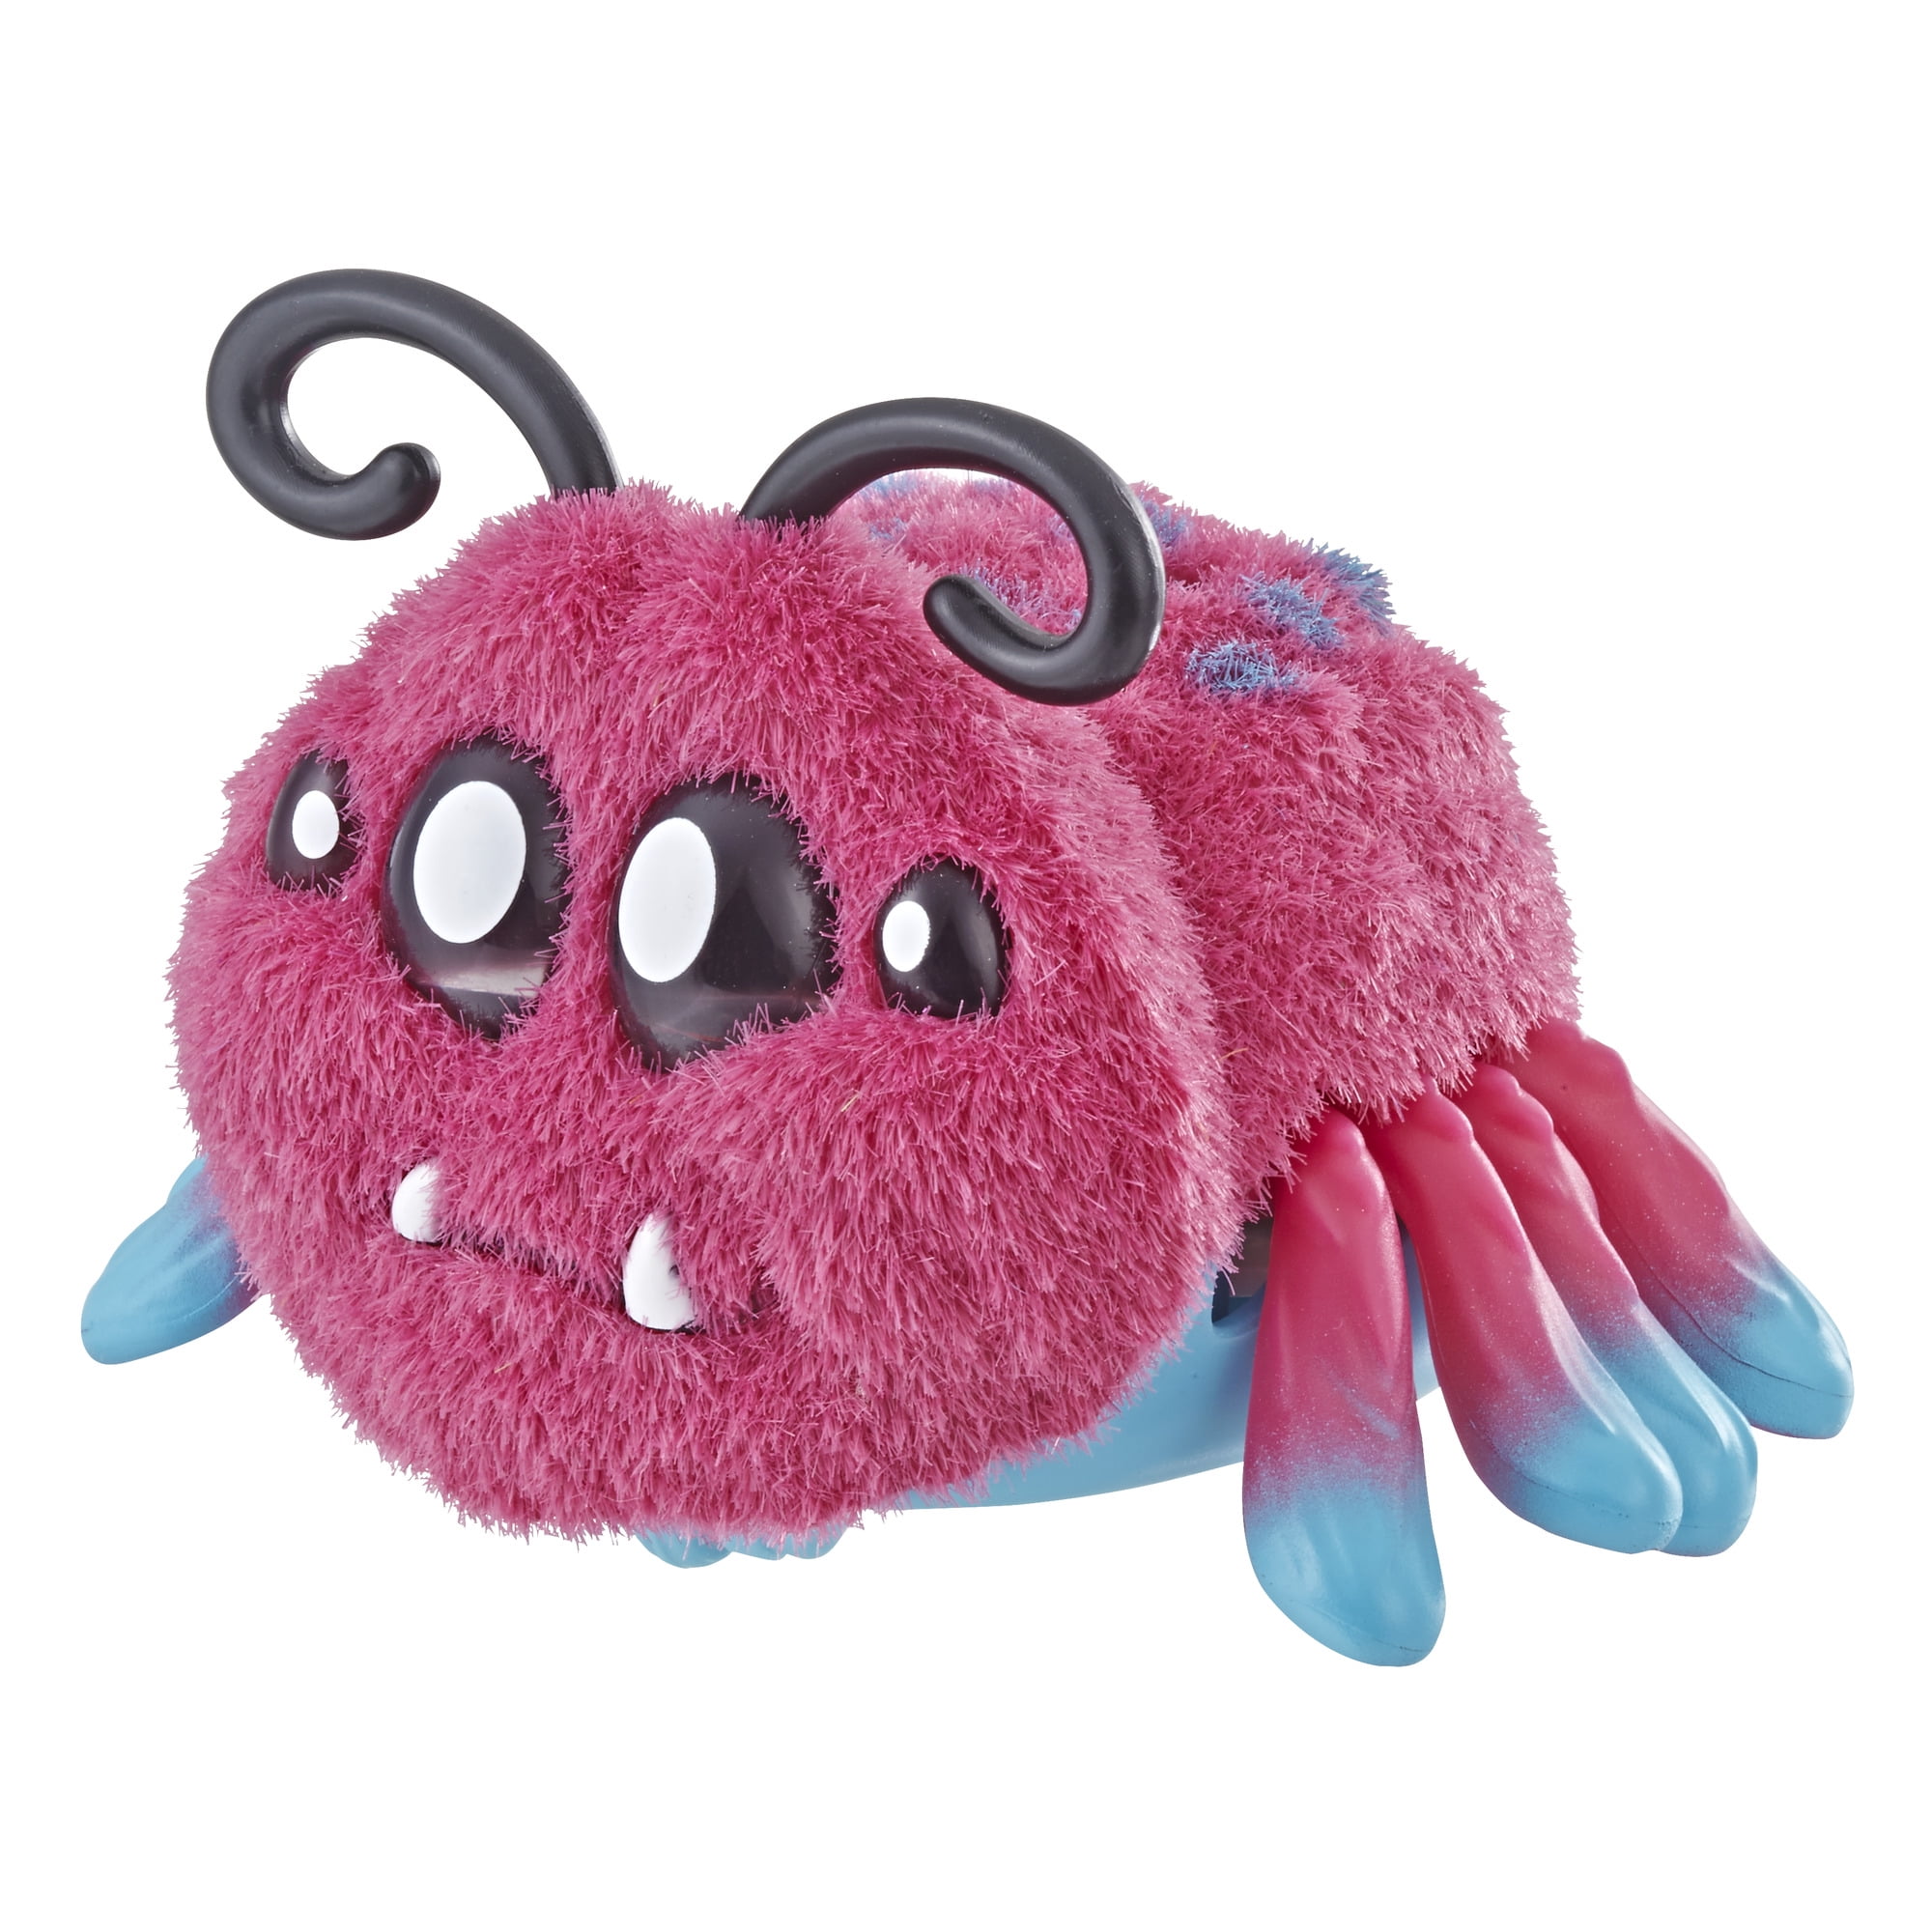 Yellies Klutzers Voice-Activated Spider Pet Exclusive New Toy Yellies On Hand 